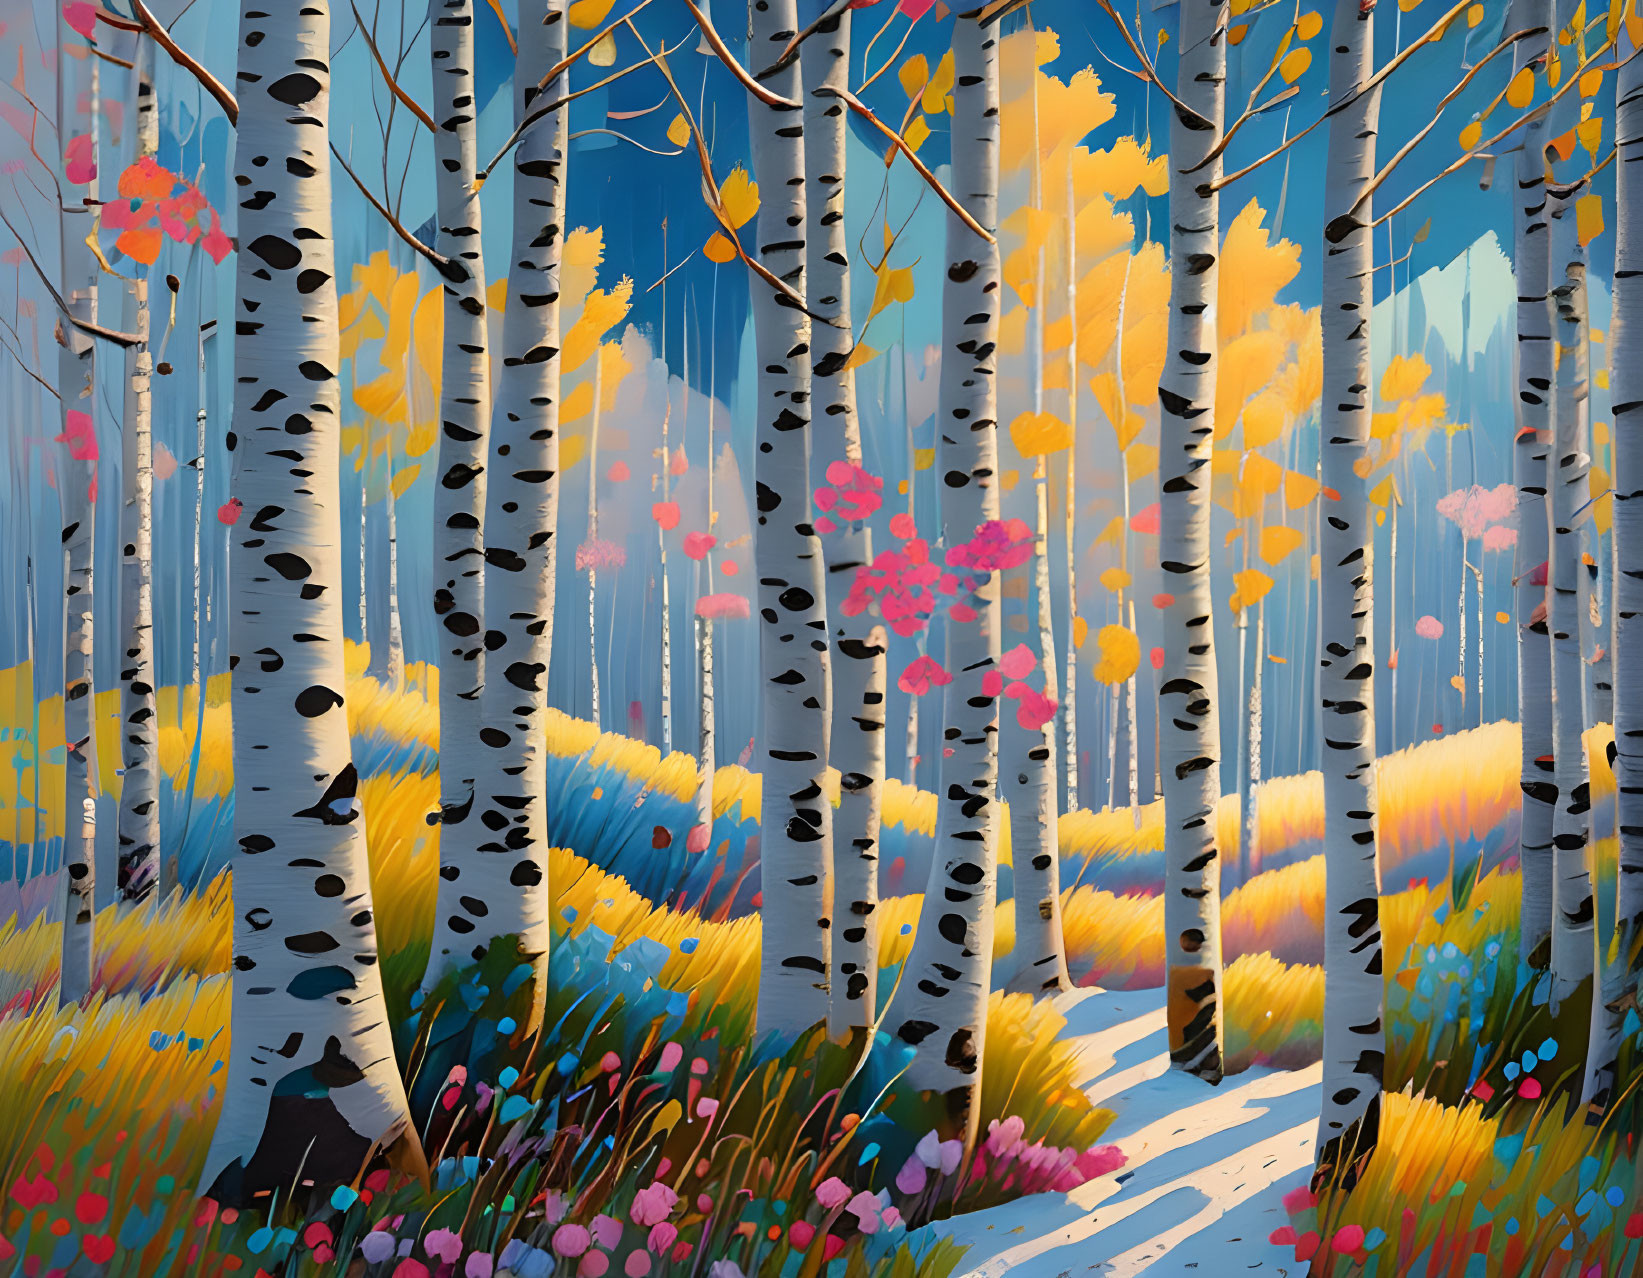 Colorful Birch Forest with Yellow Foliage and Pink Flowers Amid Blue Mountains